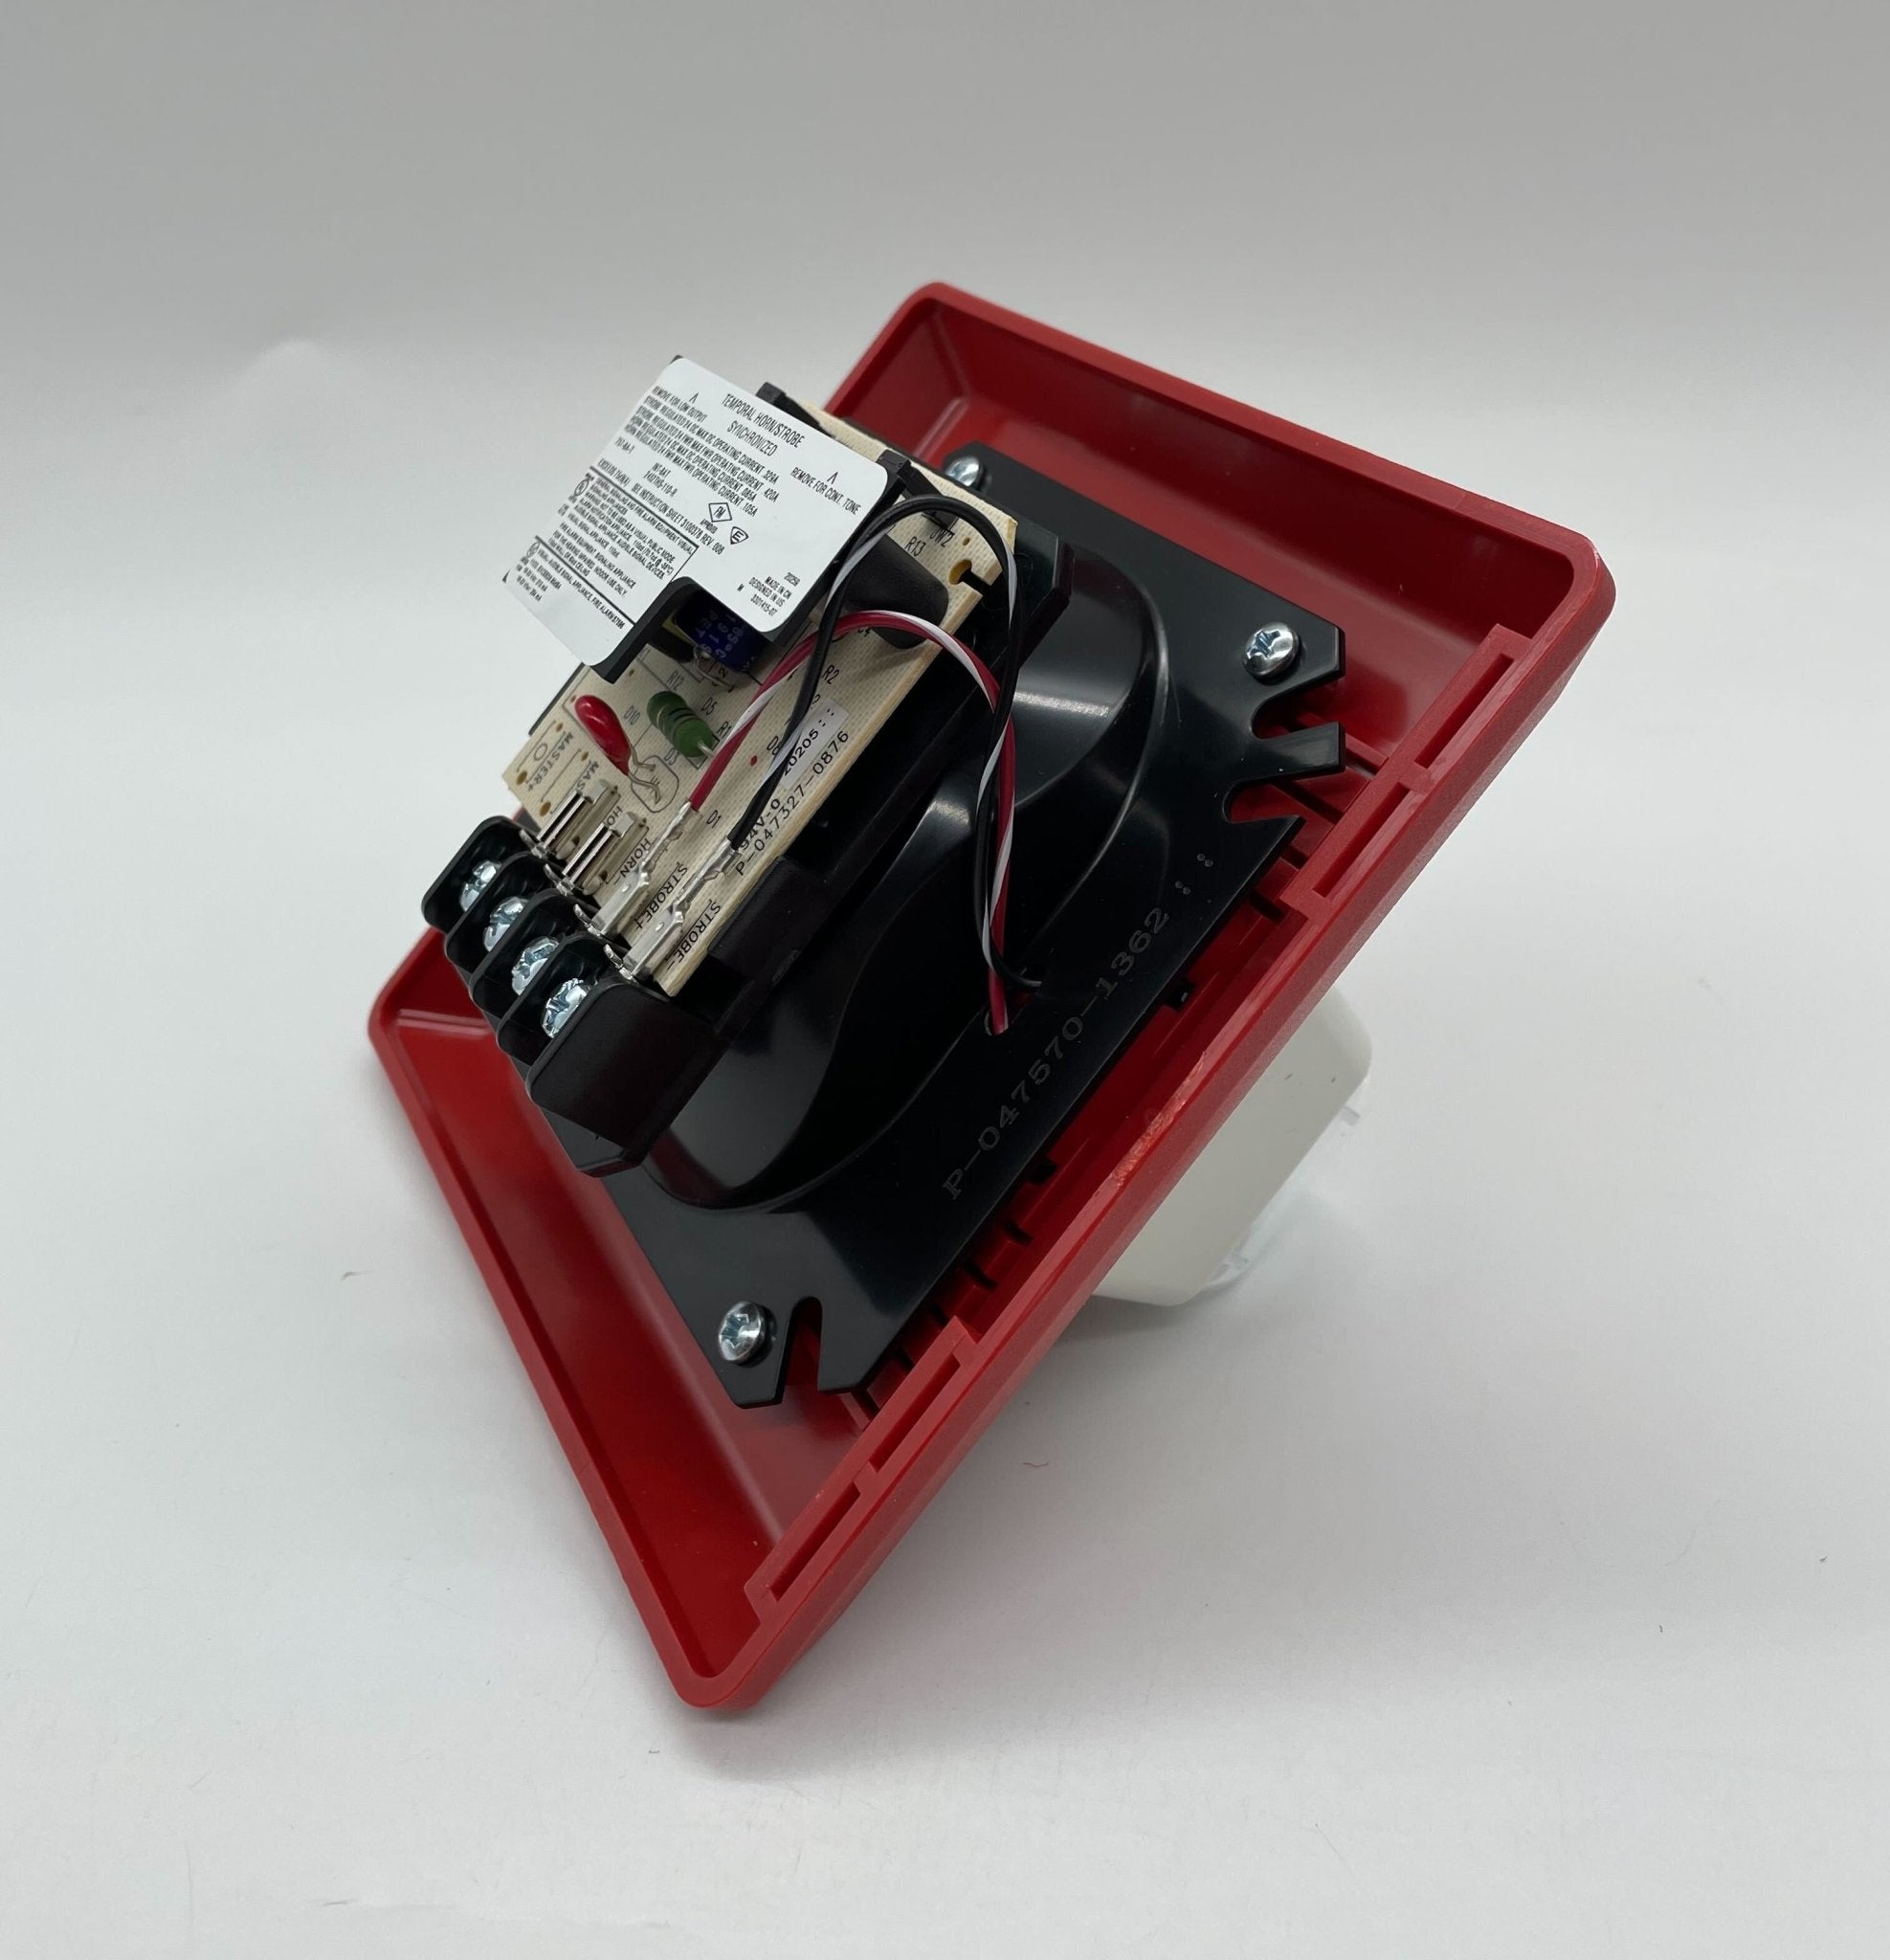 Edwards 2452THS-110-R - The Fire Alarm Supplier